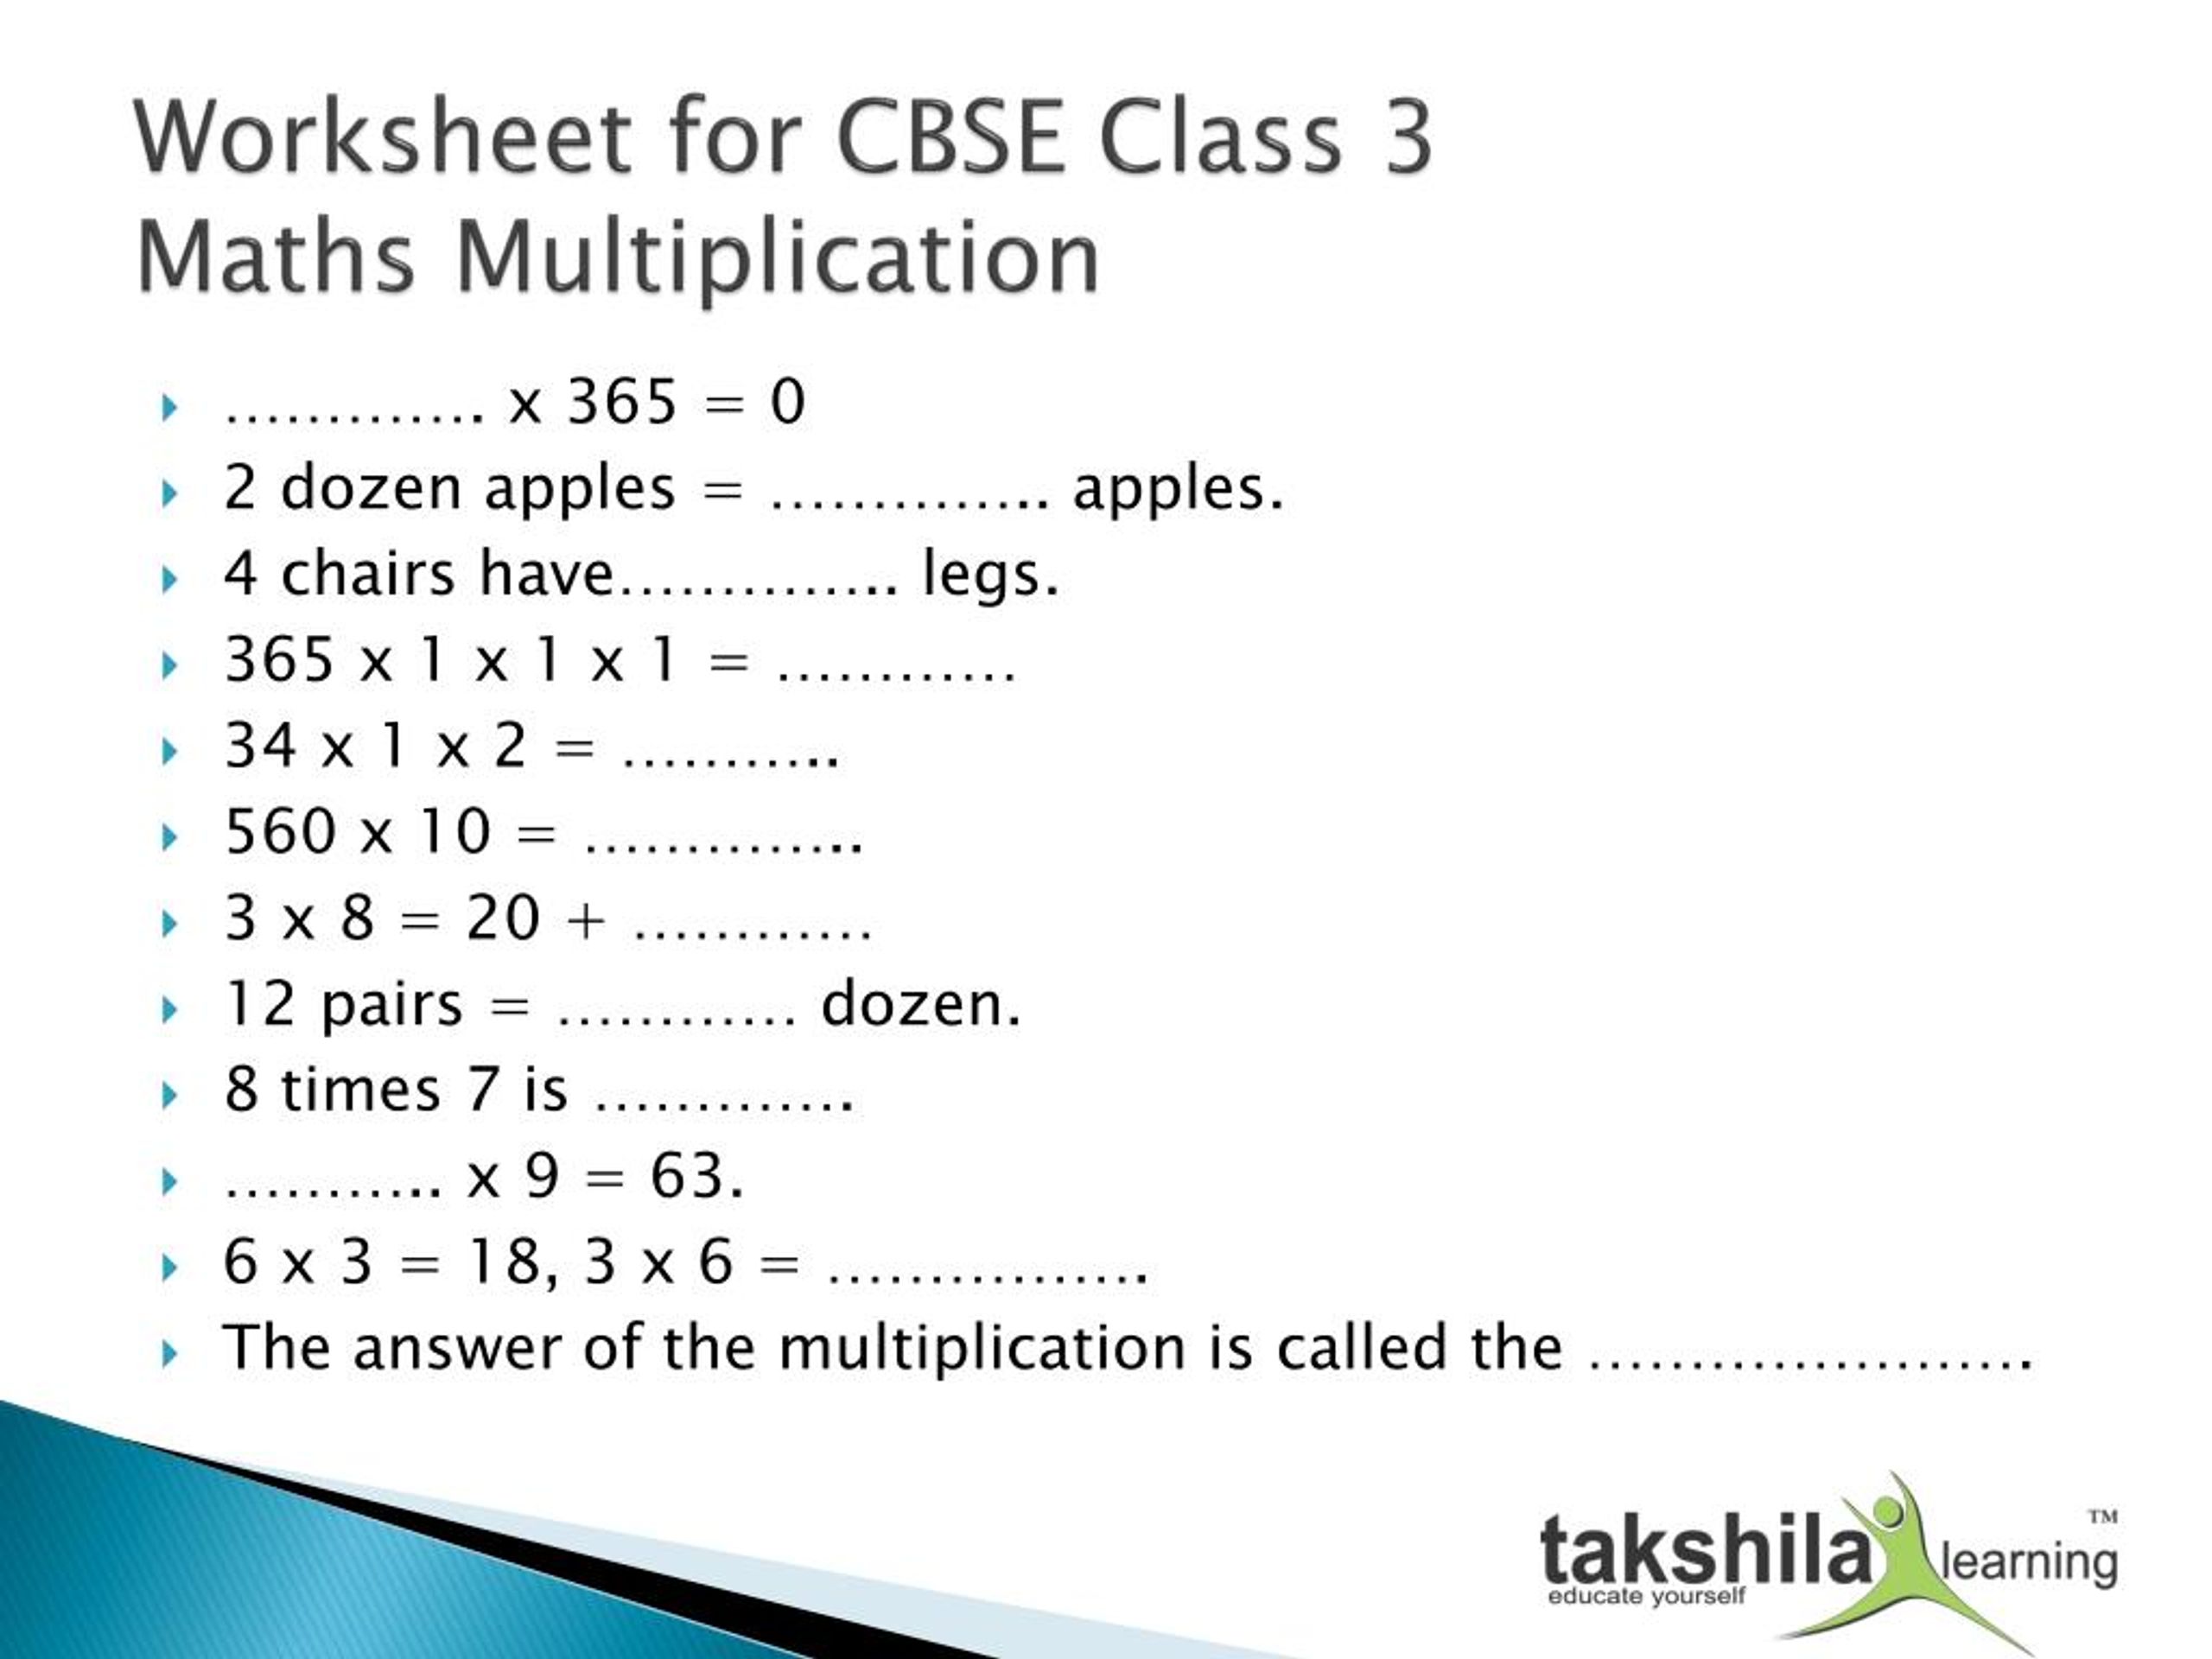 PPT Mental Maths For Kids Topic Is Multiplication Worksheet For Class 3 Maths PowerPoint 